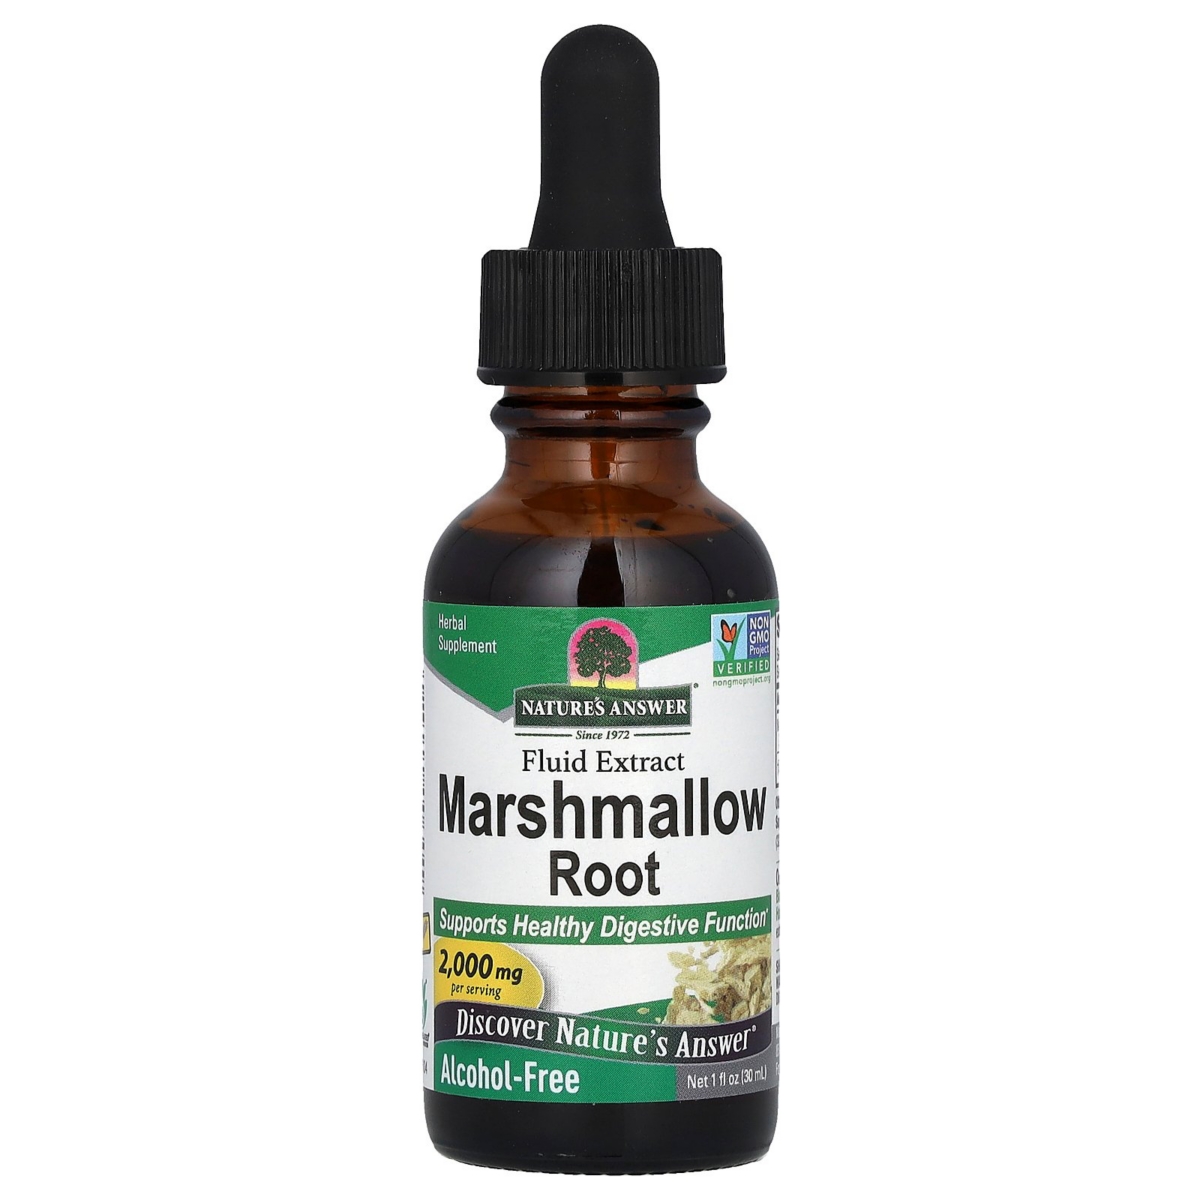 Marshmallow Root Fluid Extract Alcohol-Free 2 000 mg - 1 fl oz (30 ml) - Assorted Pre-pack (See Table